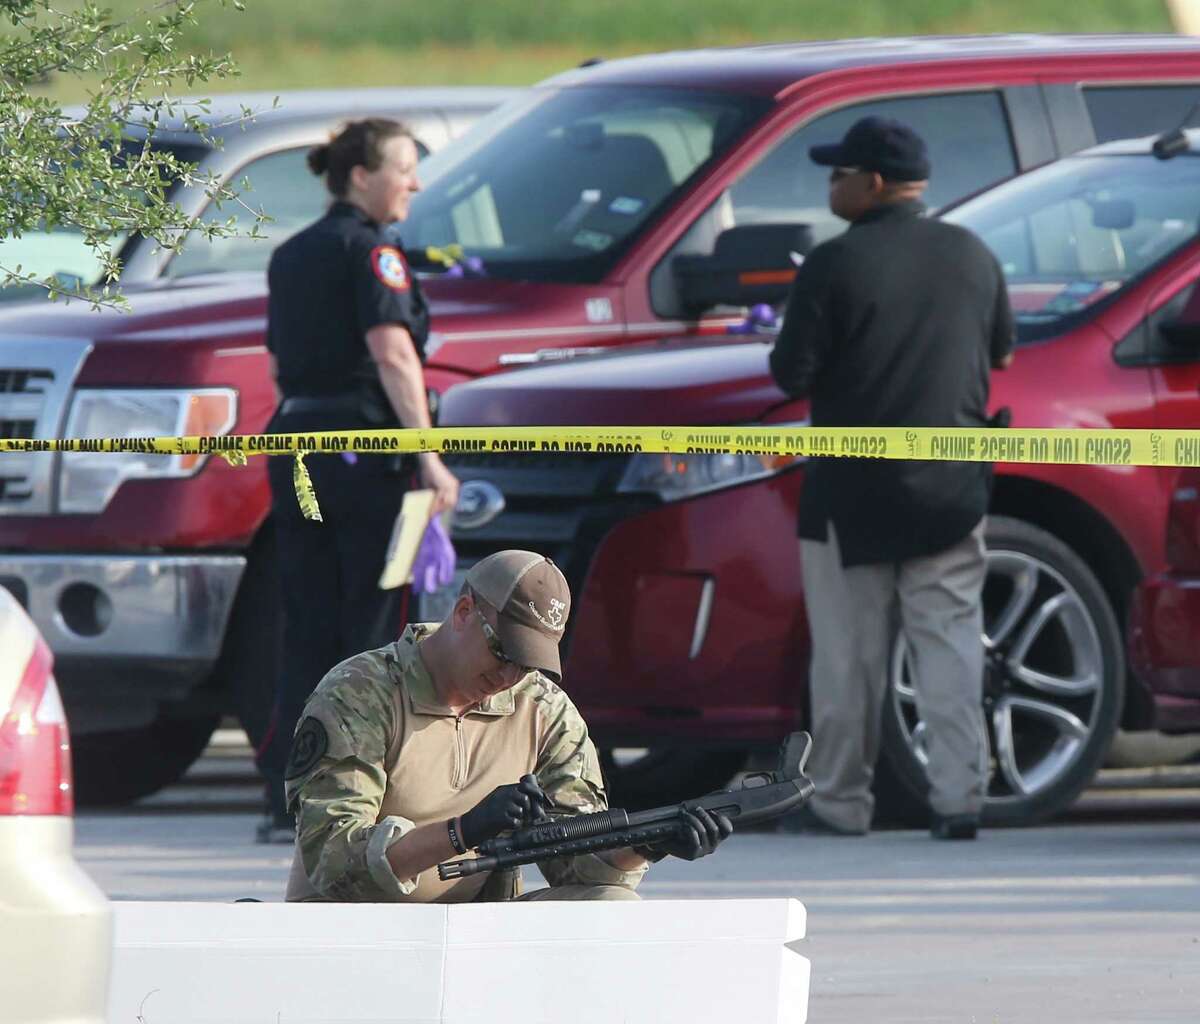 A police officer recovers a shotgun while sweeping through the parking lot of a Twin Peaks restaurant Tuesday, May, 19, 2015, in Waco, Texas. A deadly weekend shootout involving rival motorcycle gangs at the restaurant apparently began with a parking dispute and someone running over a gang member's foot, police said Tuesday. (Jerry Larson/Waco Tribune-Herald via AP)